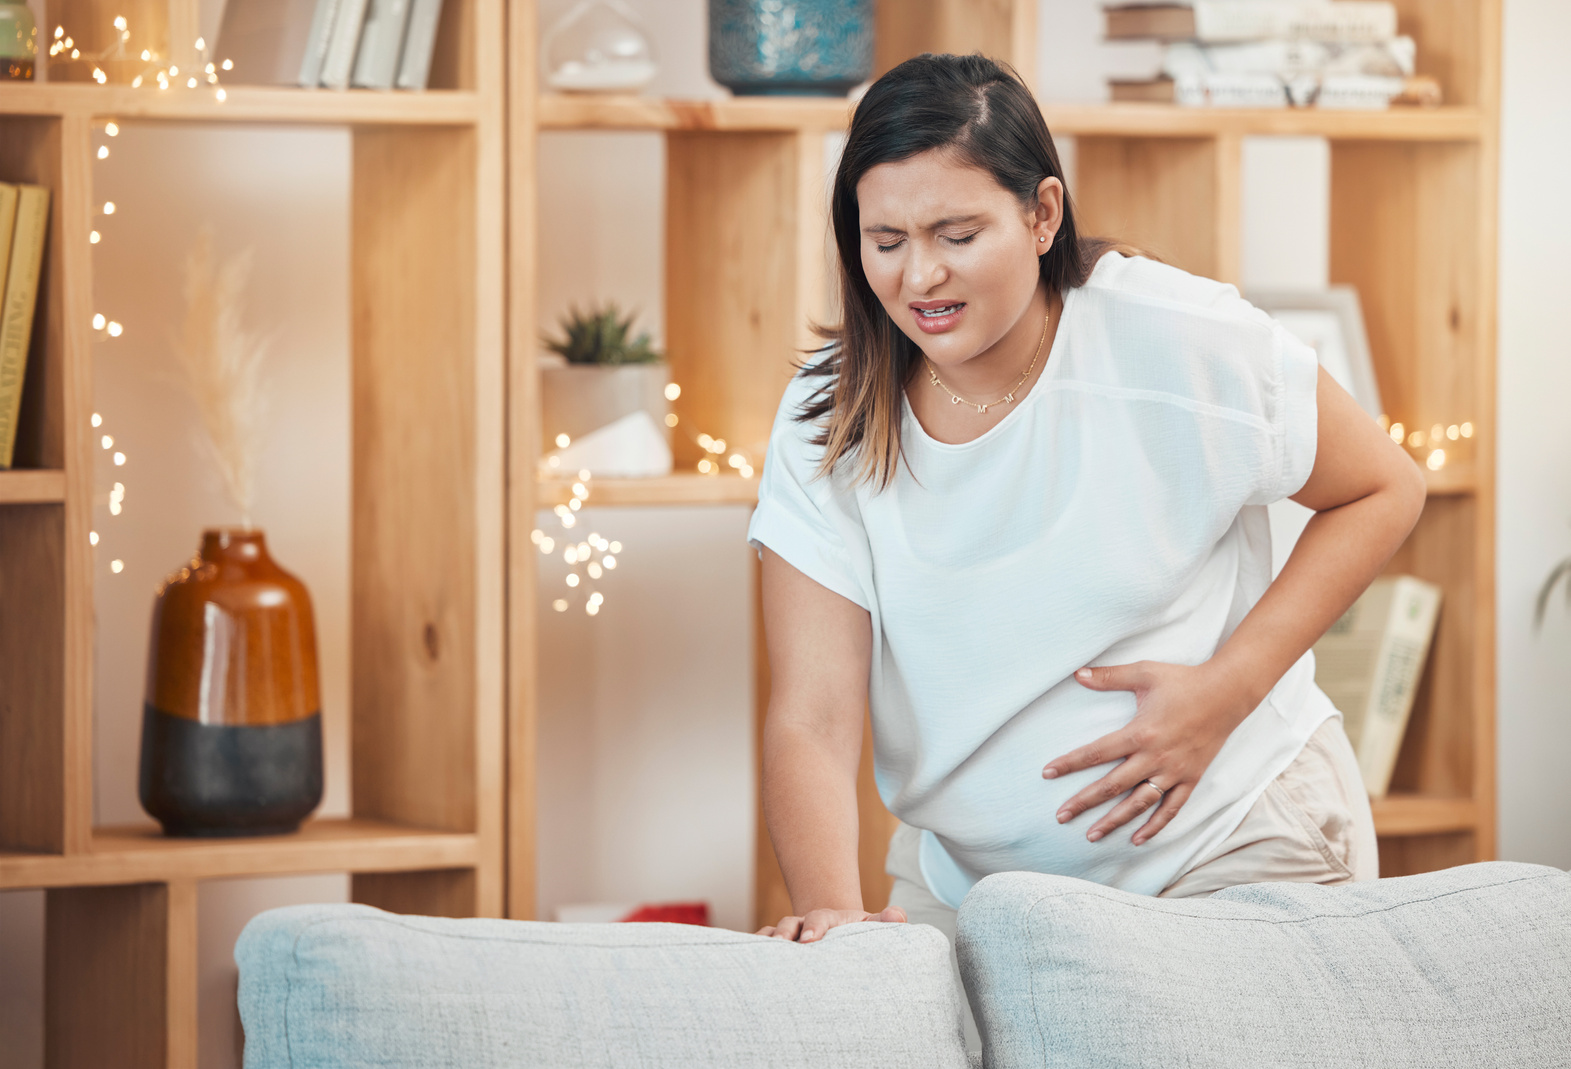 Pregnant Woman, Pain and Cramps with Hand on Stomach for Abdominal Problem, Discomfort or Childbirth Contractions for Labour. Female with Stress, Stomachache or Spasm Causing Miscarriage in Pregnancy